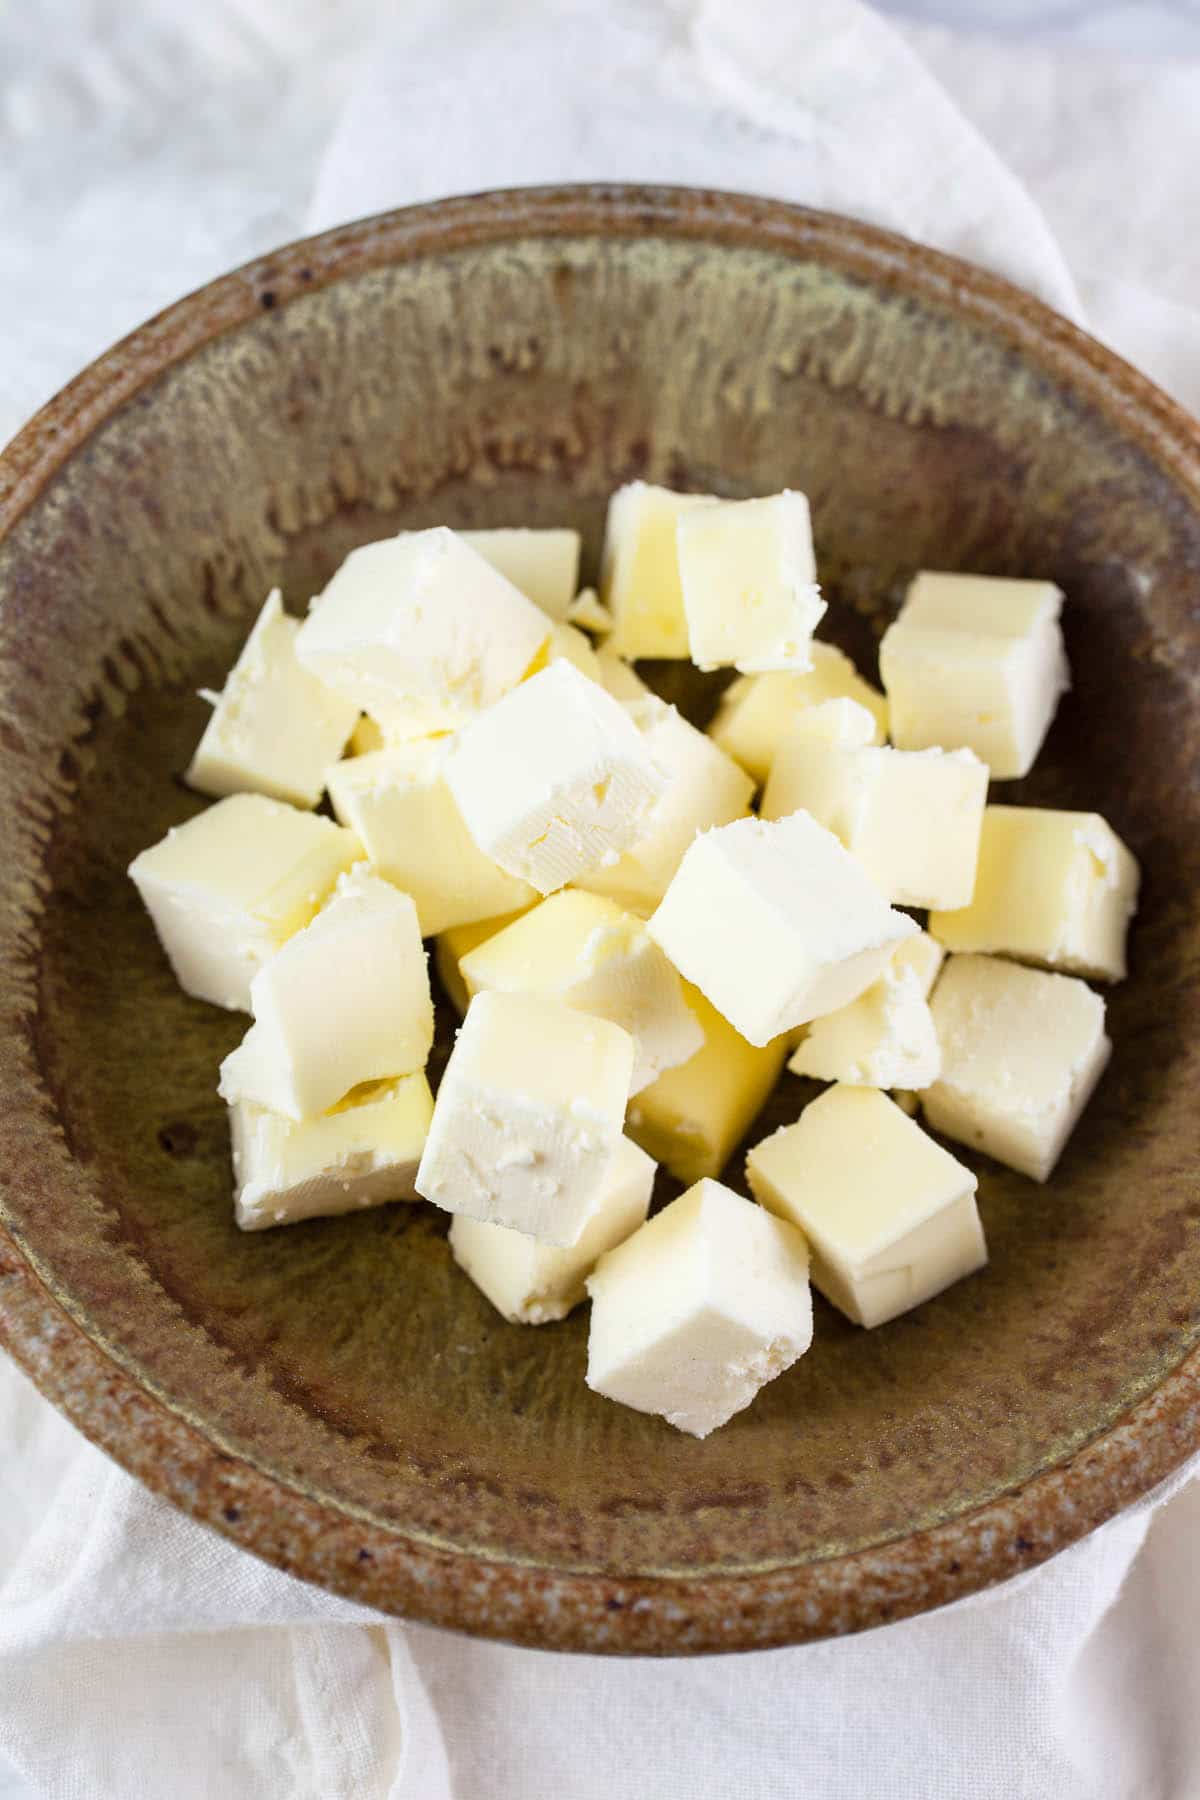 Frozen butter cubes in small ceramic bowl.